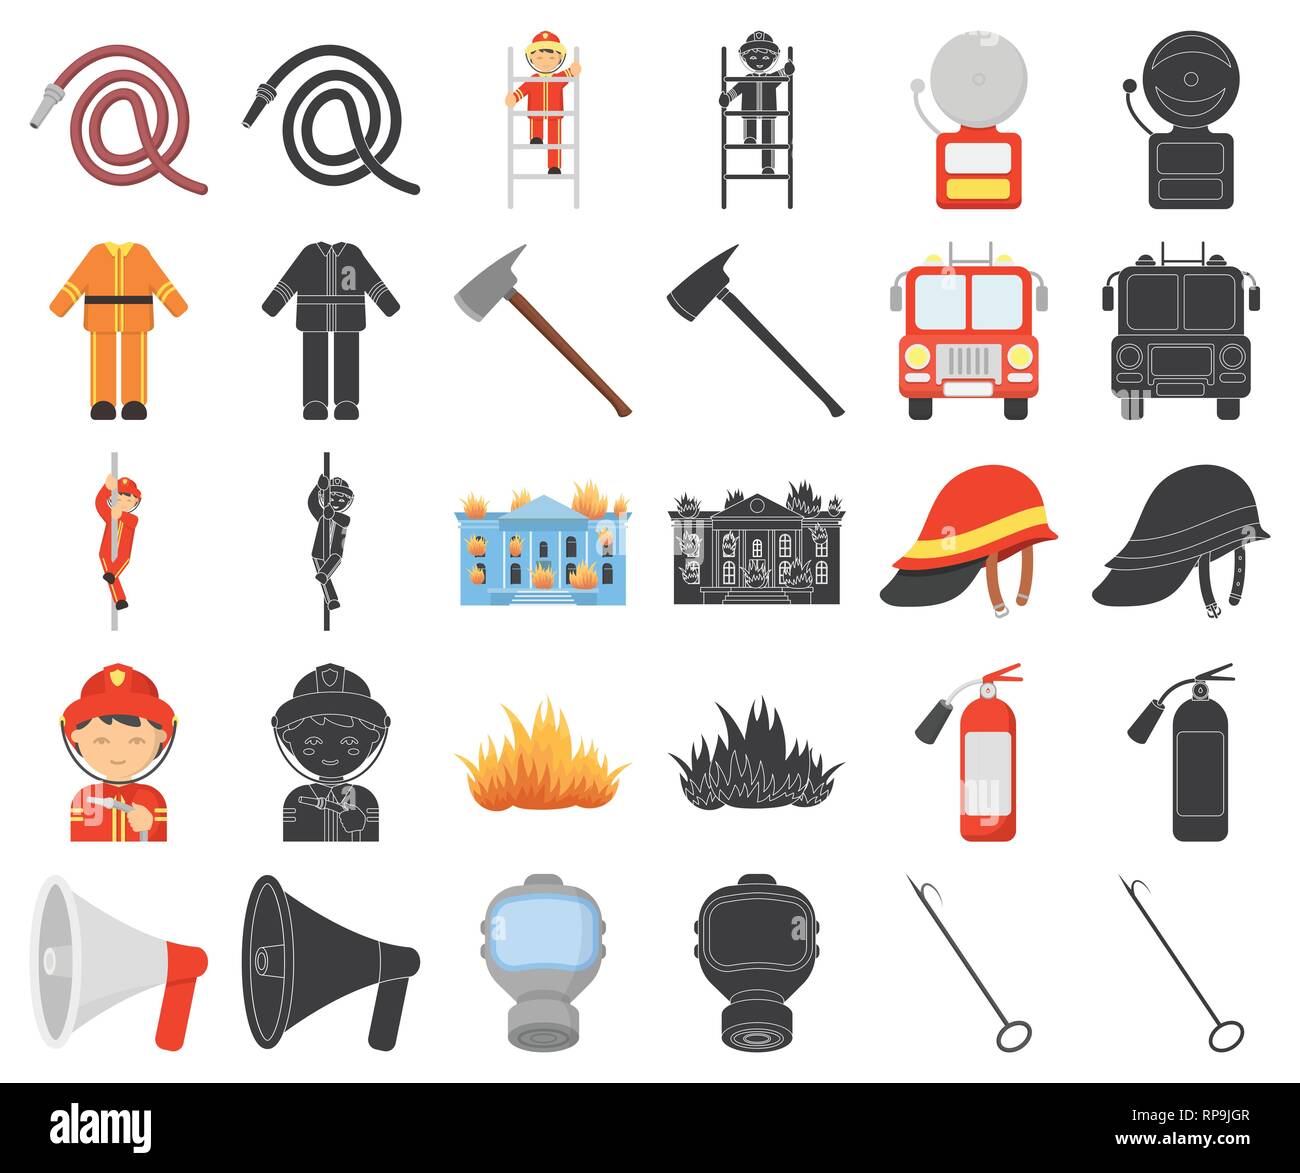 accessories,apparatus,art,attribute,axe,bucket,building,bunker,cartoon,black,collection,conical,department,design,equipment,extinguishing,extingushier,fire,firefighter,firefighting,flame,gas,gear,helmet,icon,illustration,isolated,logo,mask,organization,pike,pole,pump,ring,separation,service,set,sign,slide,symbol,tools,vector,web Vector Vectors , Stock Vector